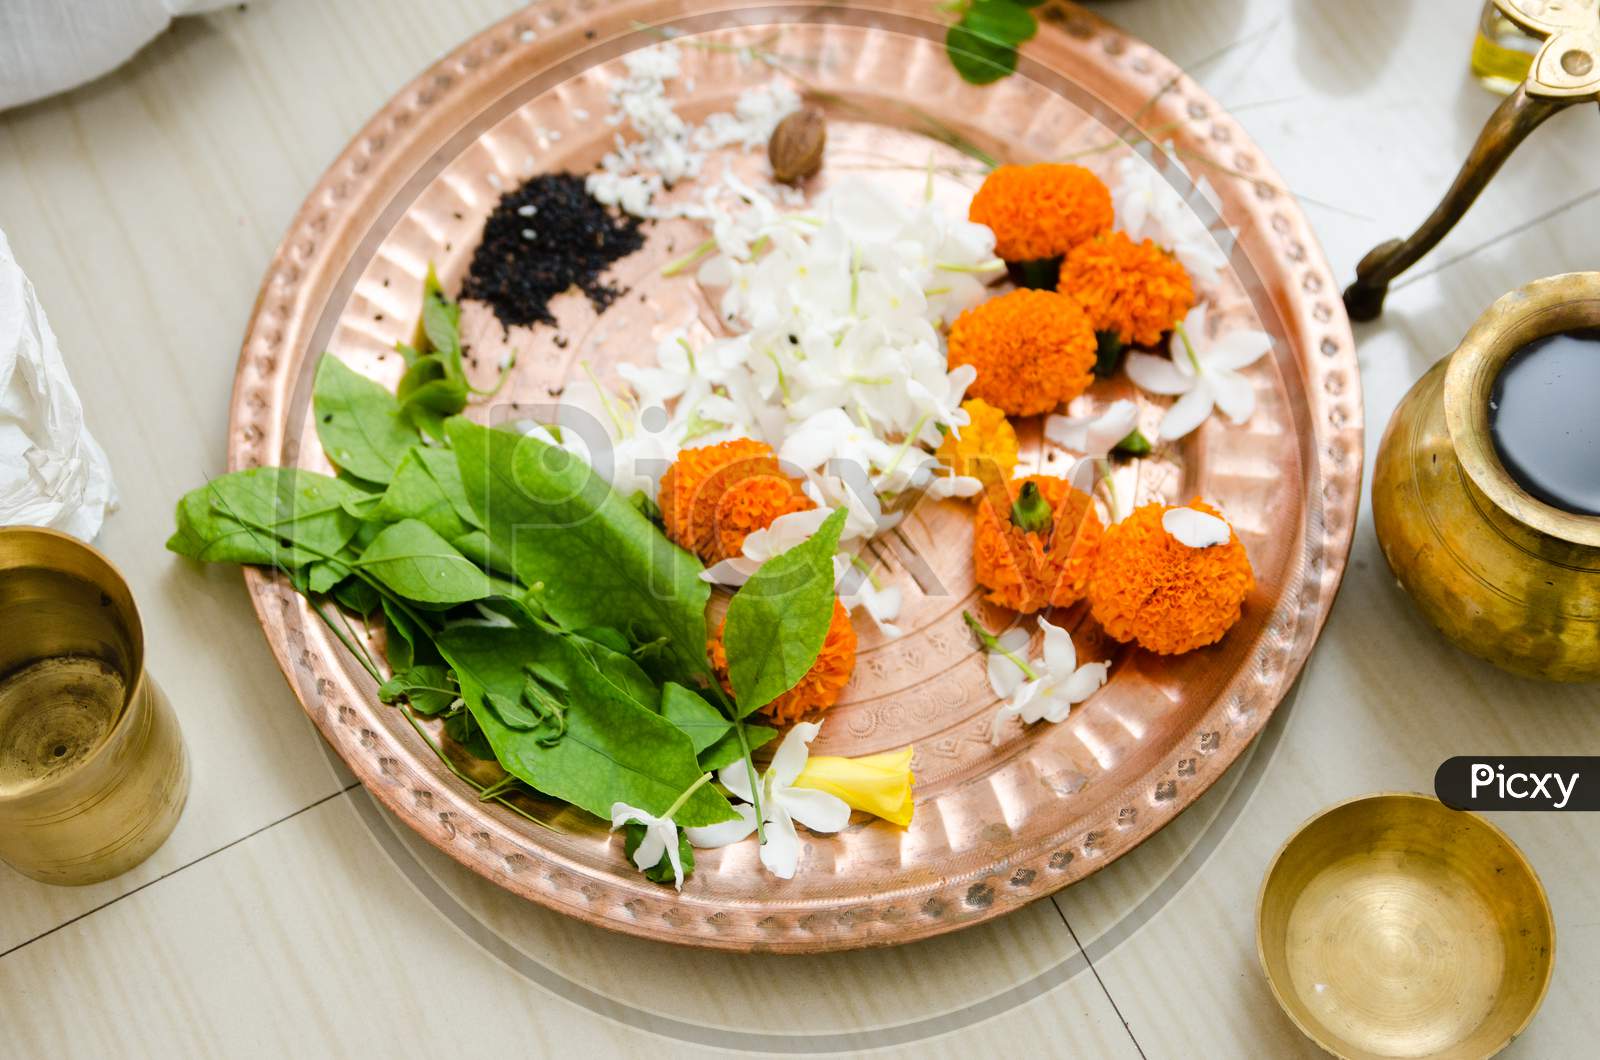 Flowers kept in plate during a ritual of rice ceremony in India